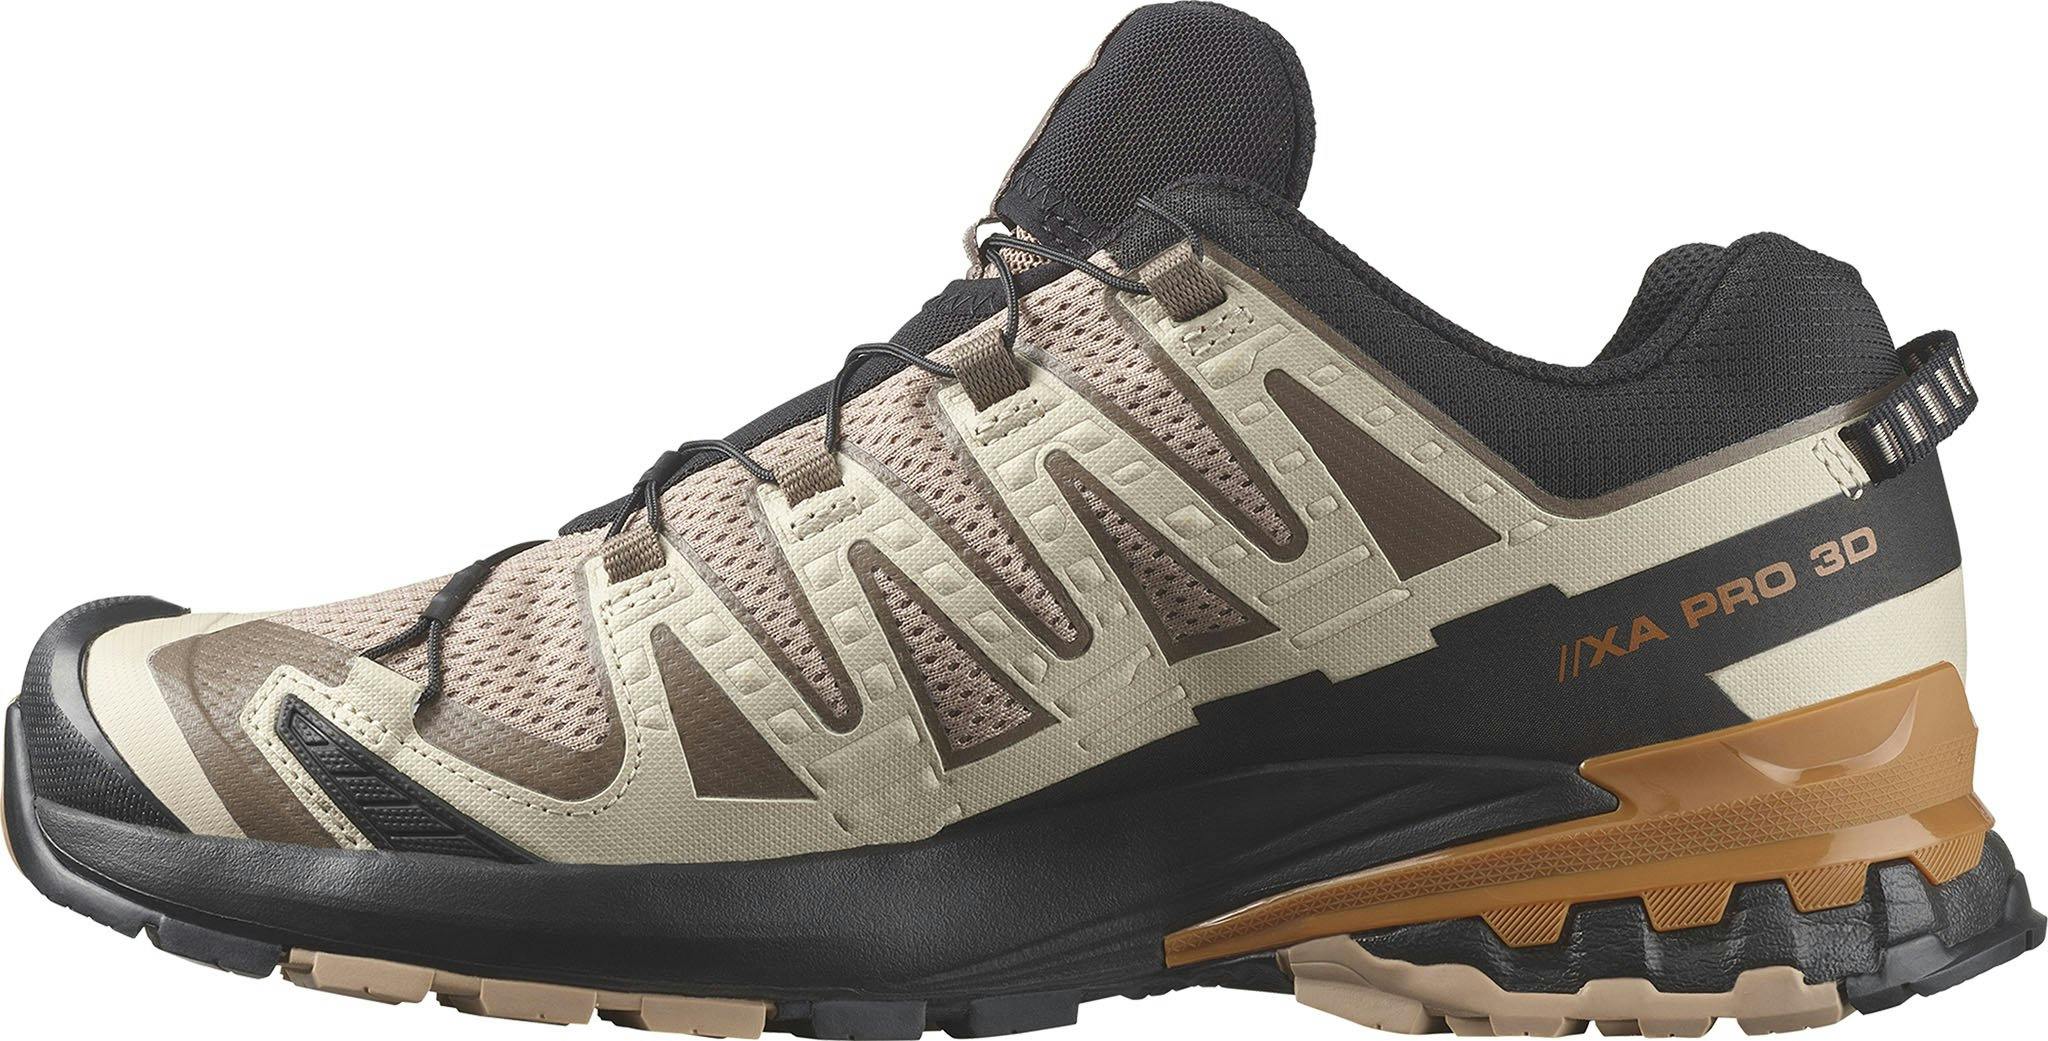 Product gallery image number 3 for product XA Pro 3D V9 Trail Running Shoes - Men's